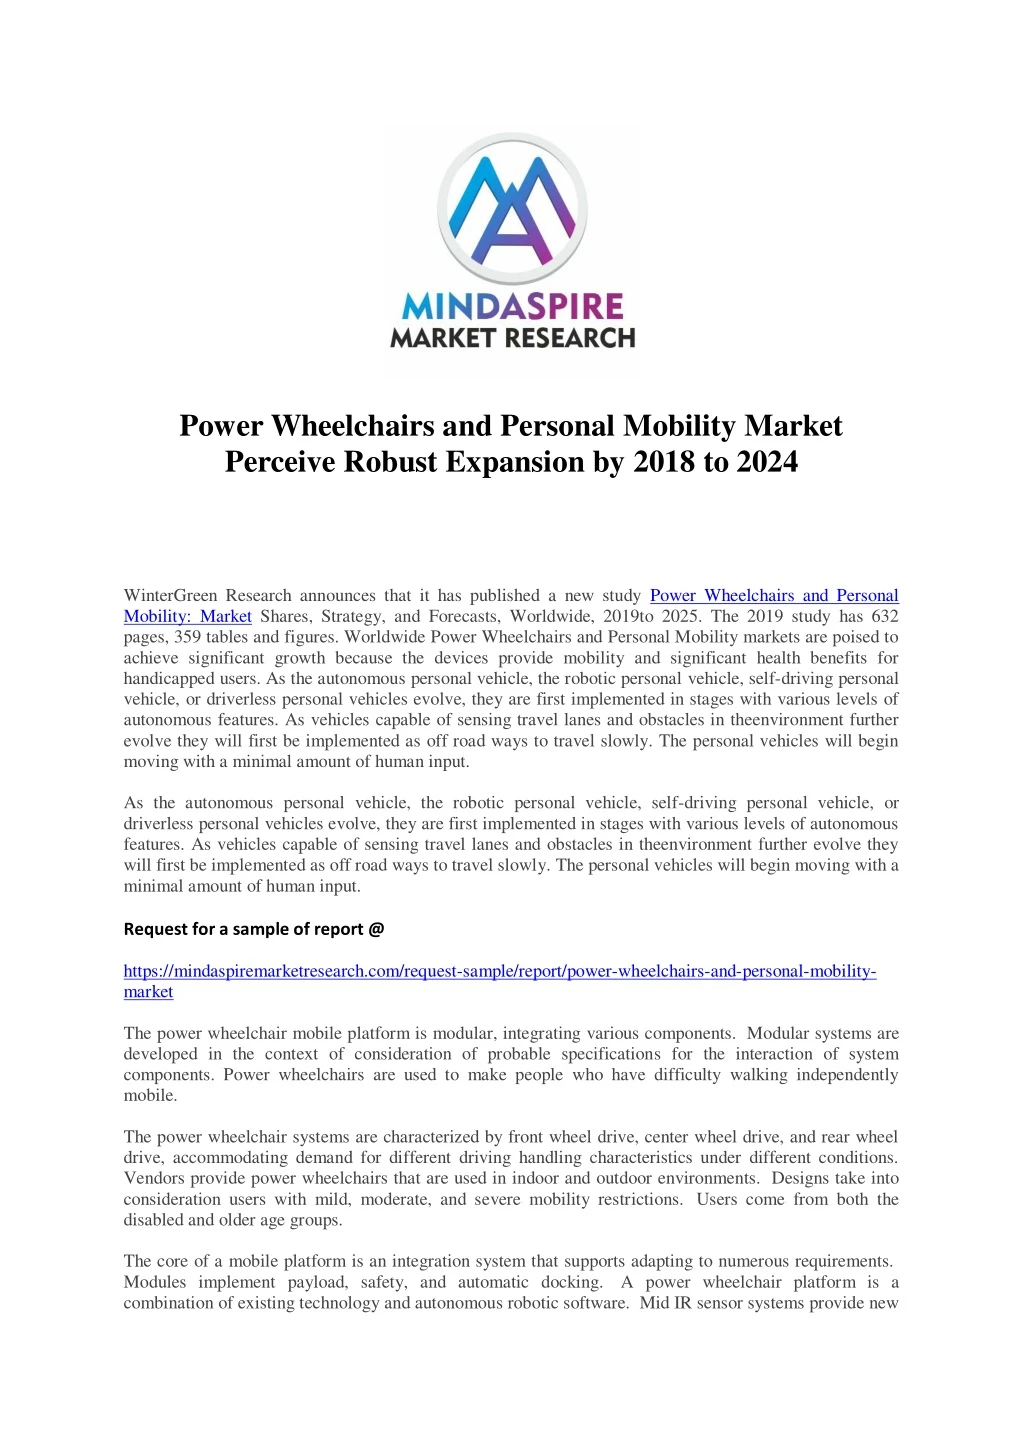 power wheelchairs and personal mobility market